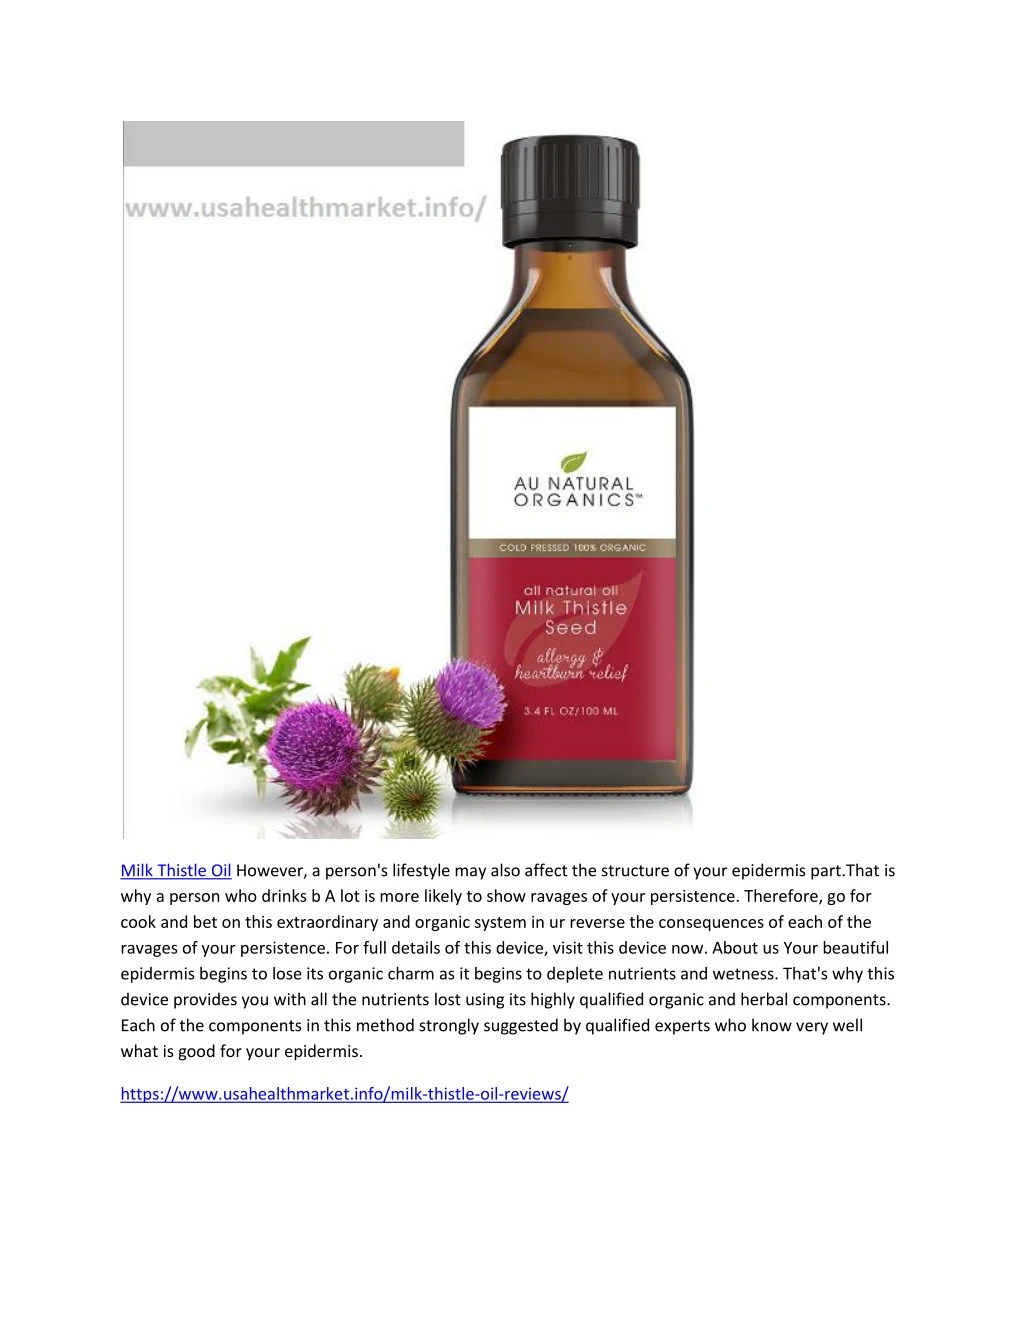 milk thistle oil however a person s lifestyle